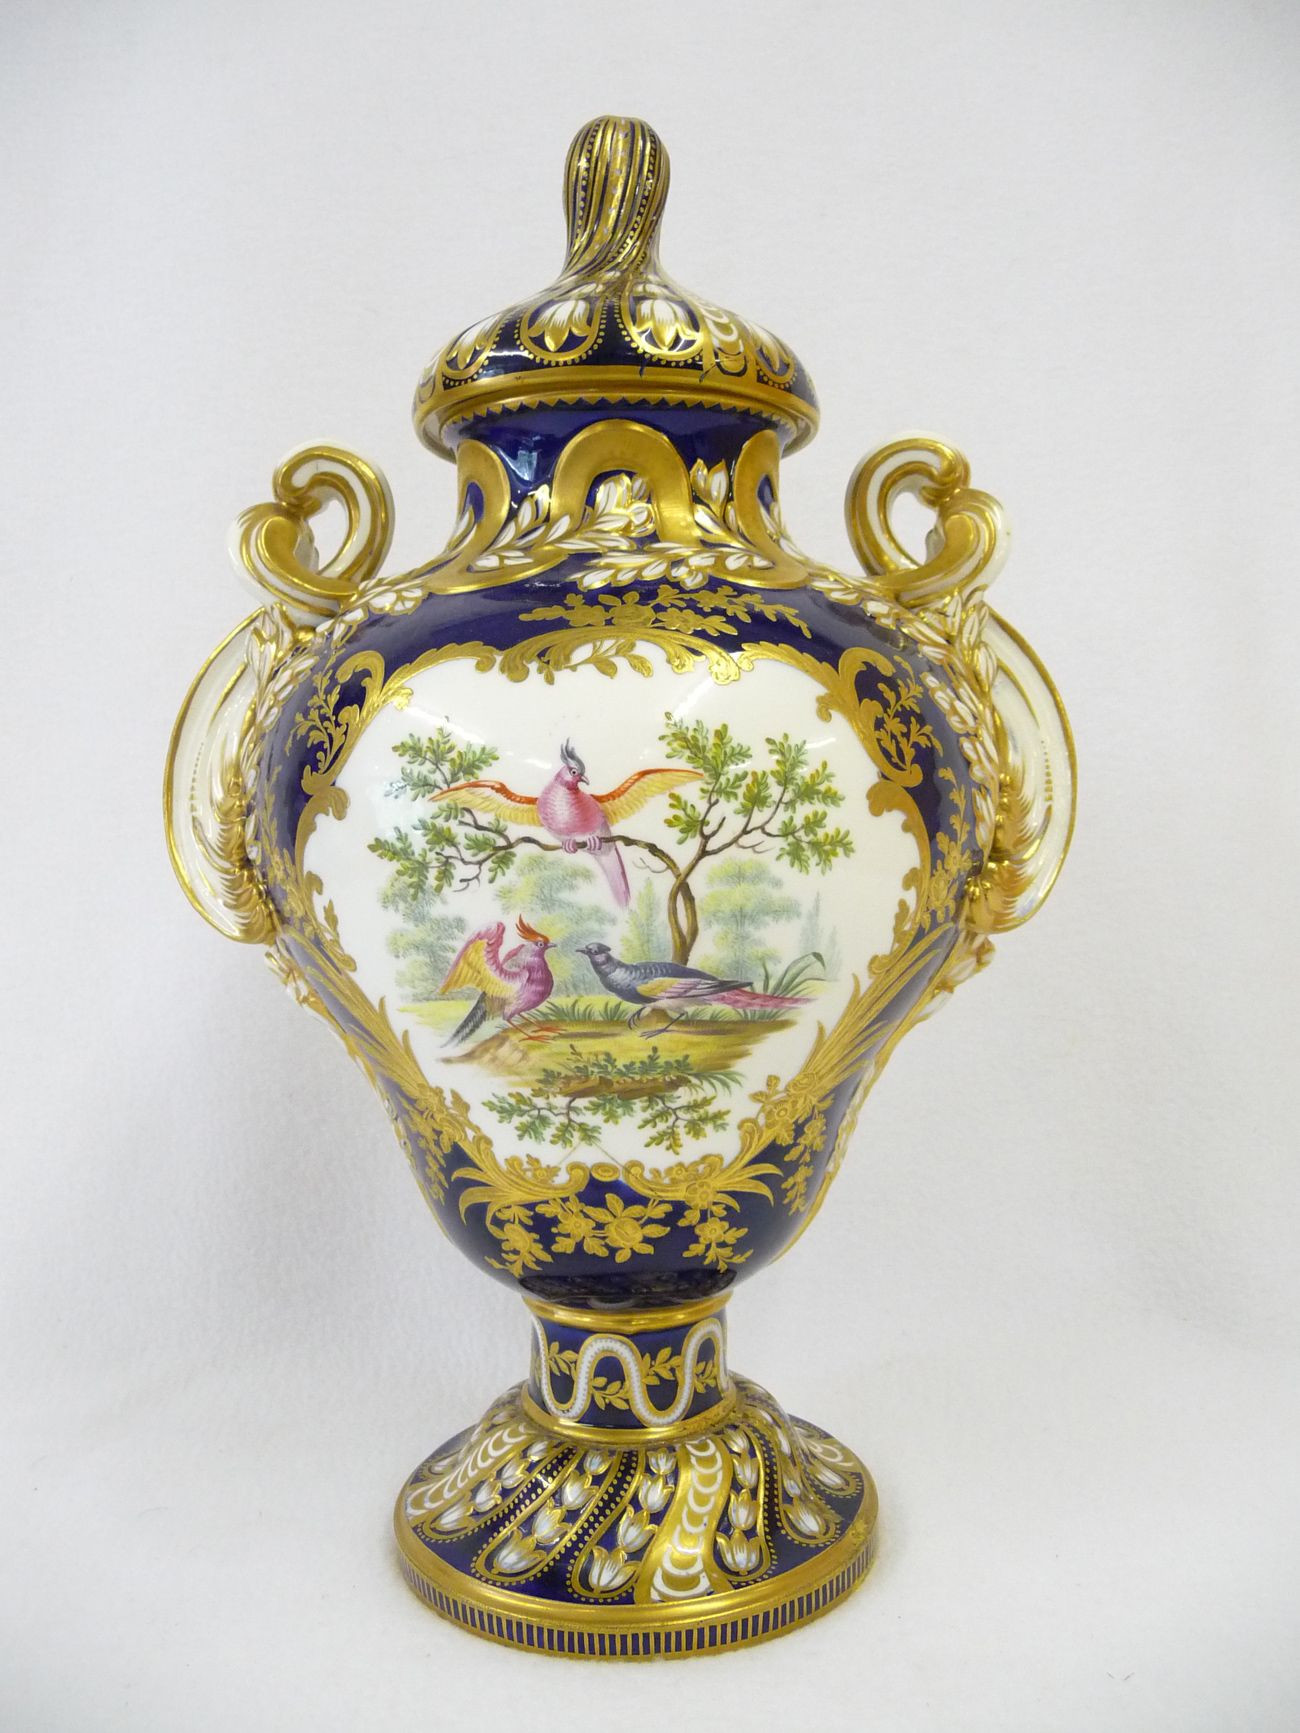 11 Awesome Metal Urn Vase 2024 free download metal urn vase of probably coalport porcelain company shropshire england rococo with probably coalport porcelain company shropshire england rococo vase and cover c